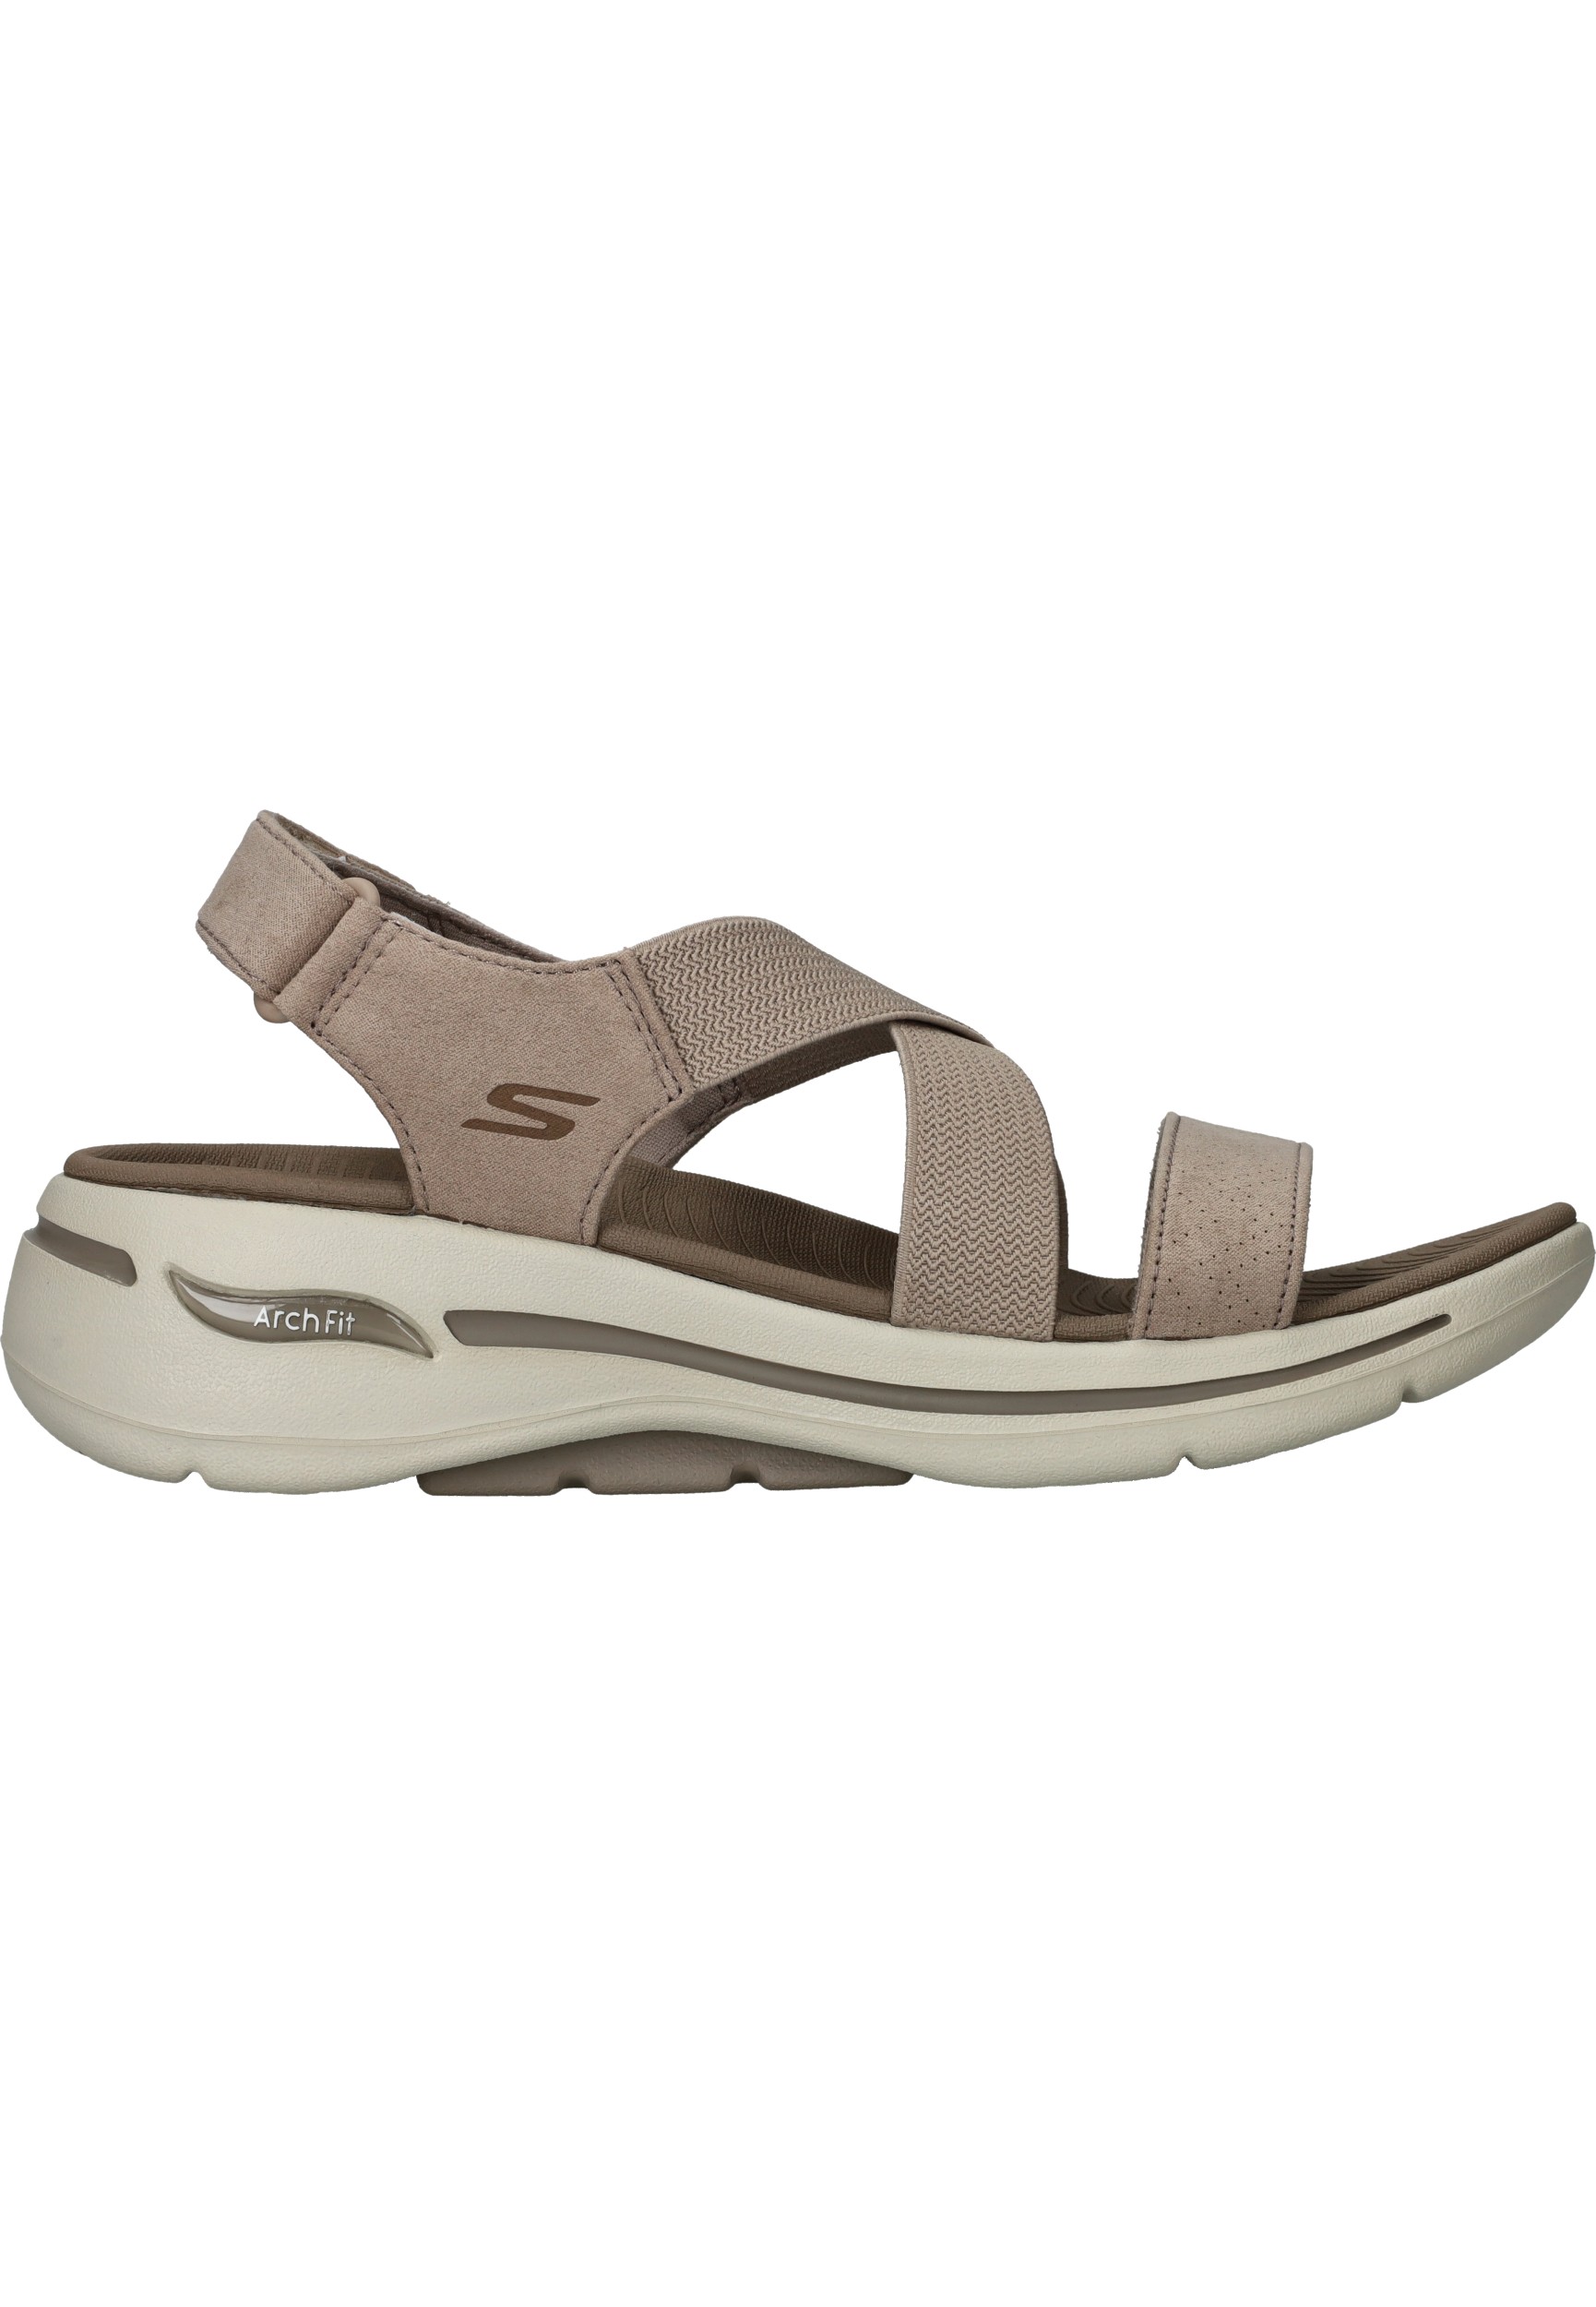 Skechers Go Walk Arch Fit Sandal Tre Dames Sneakers - Taupe - Maat 42